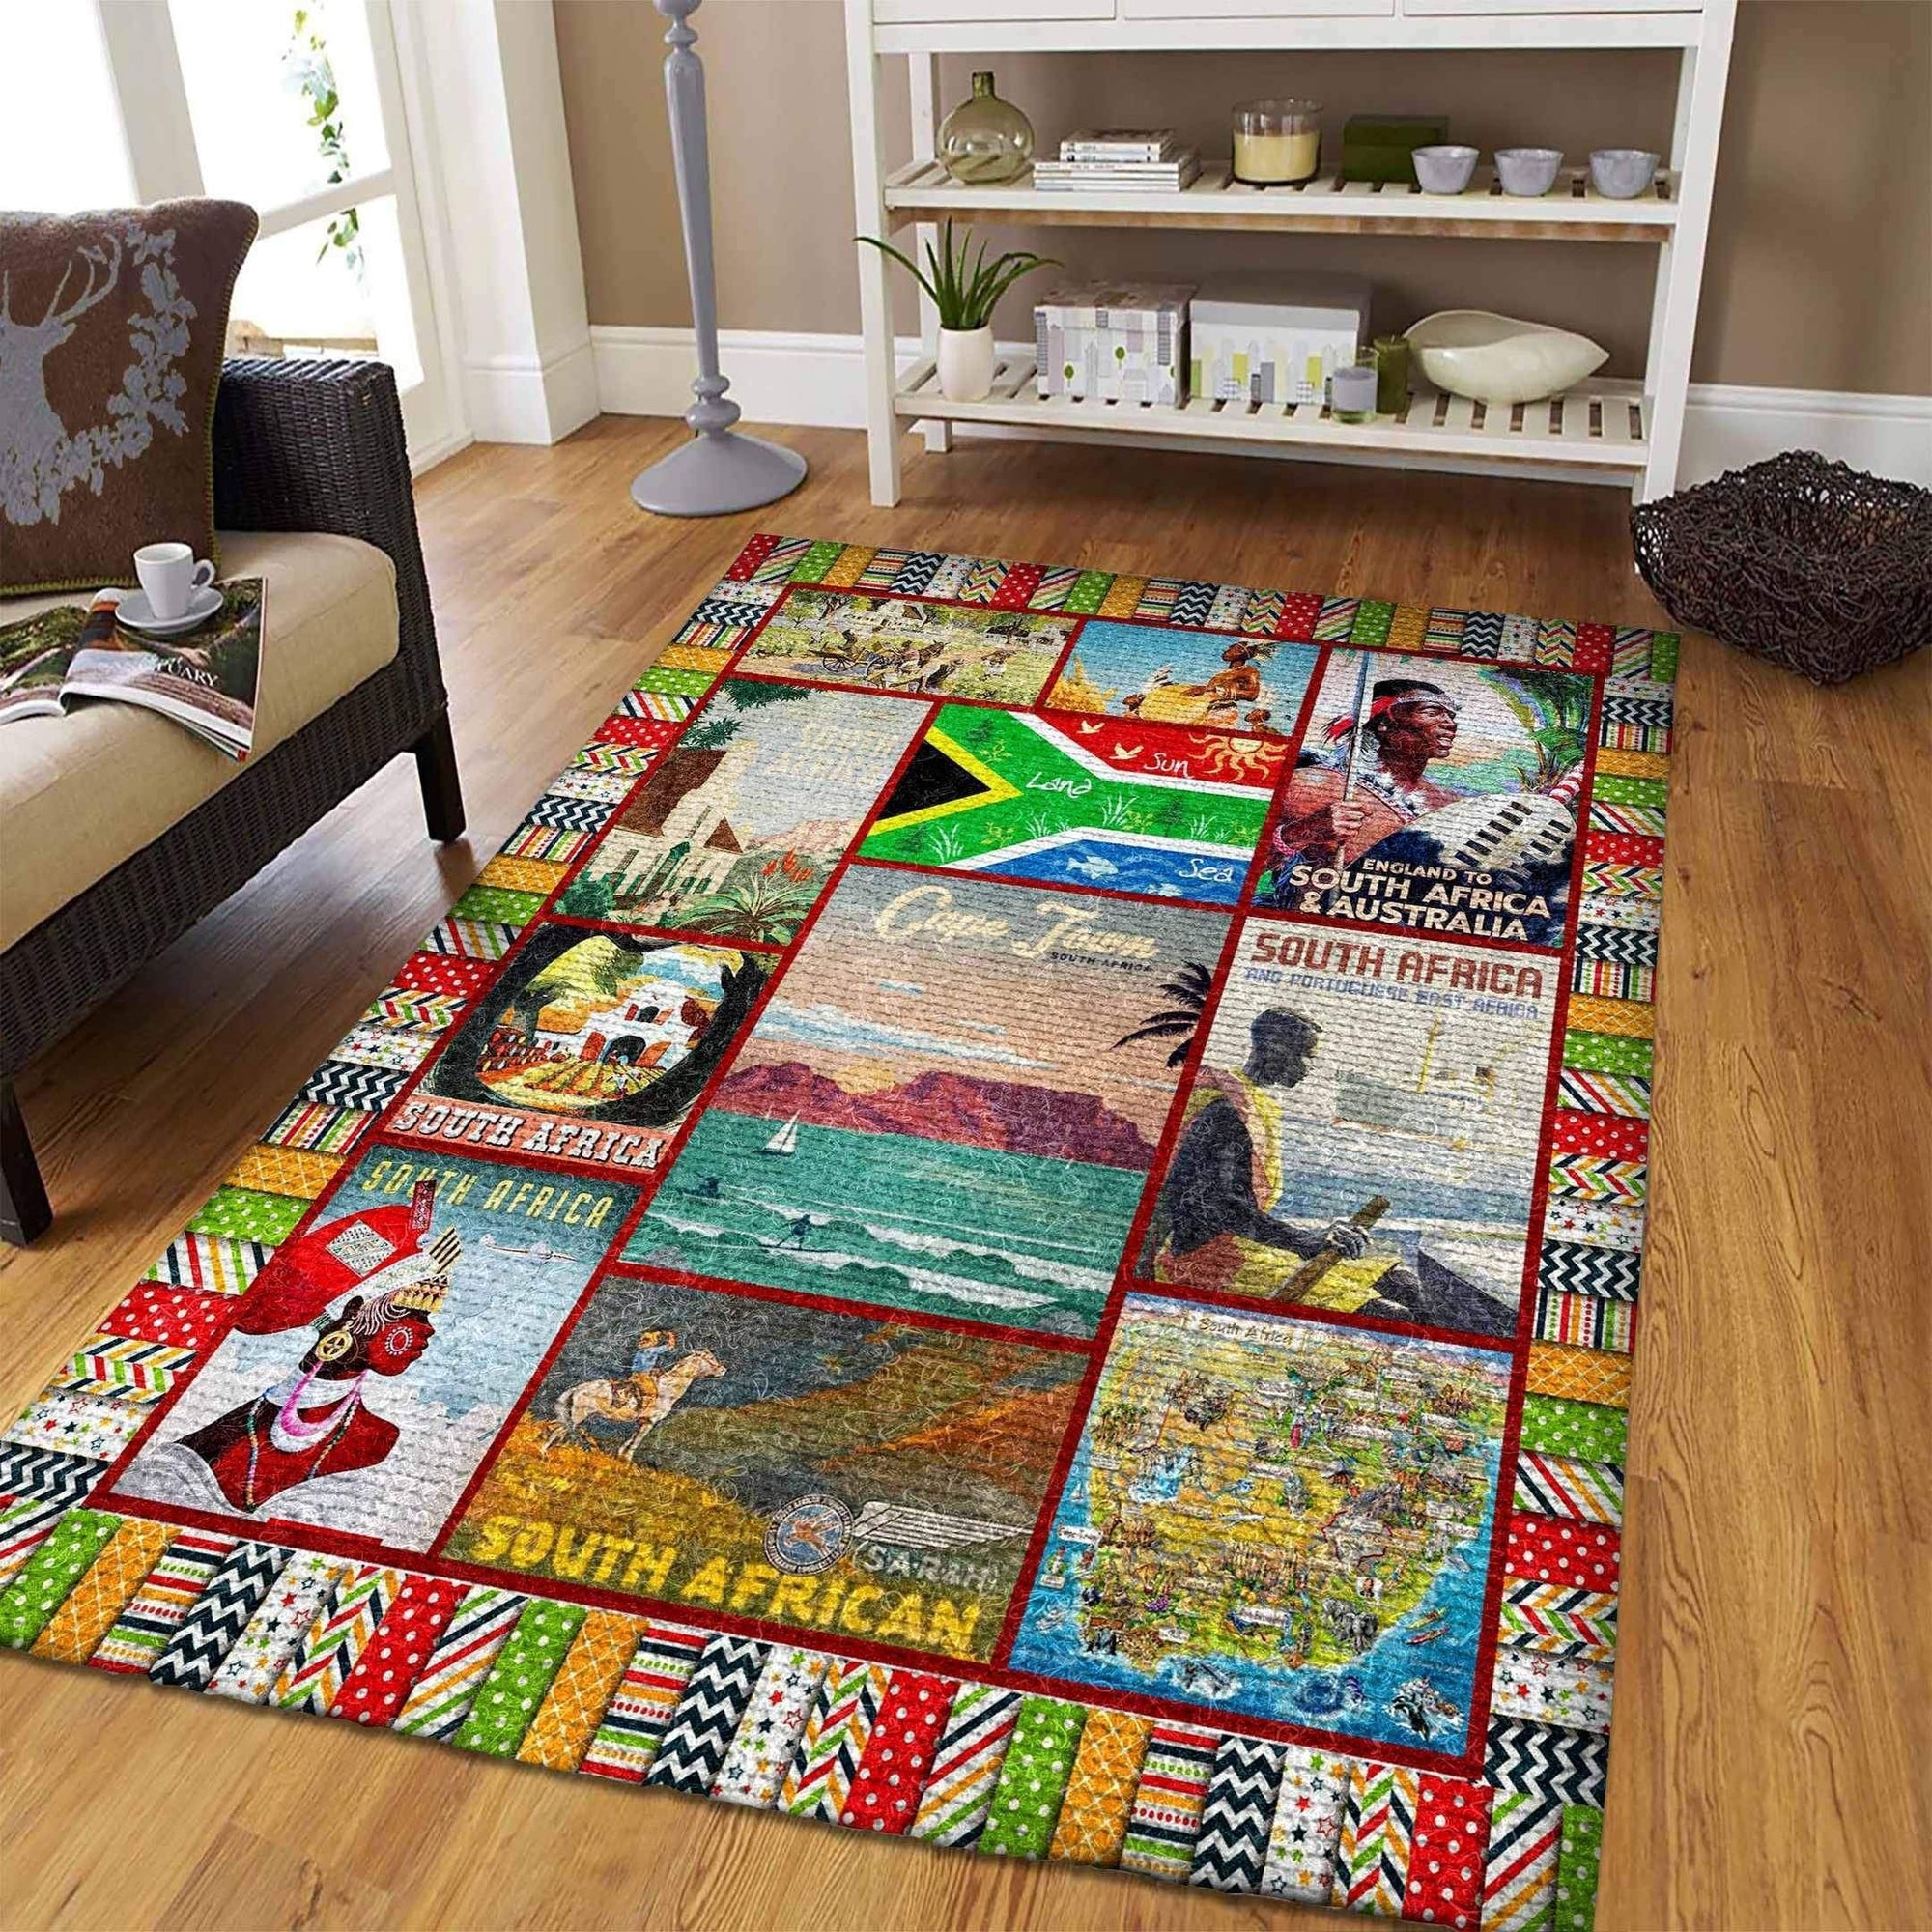 africa-area-rug-african-patterns